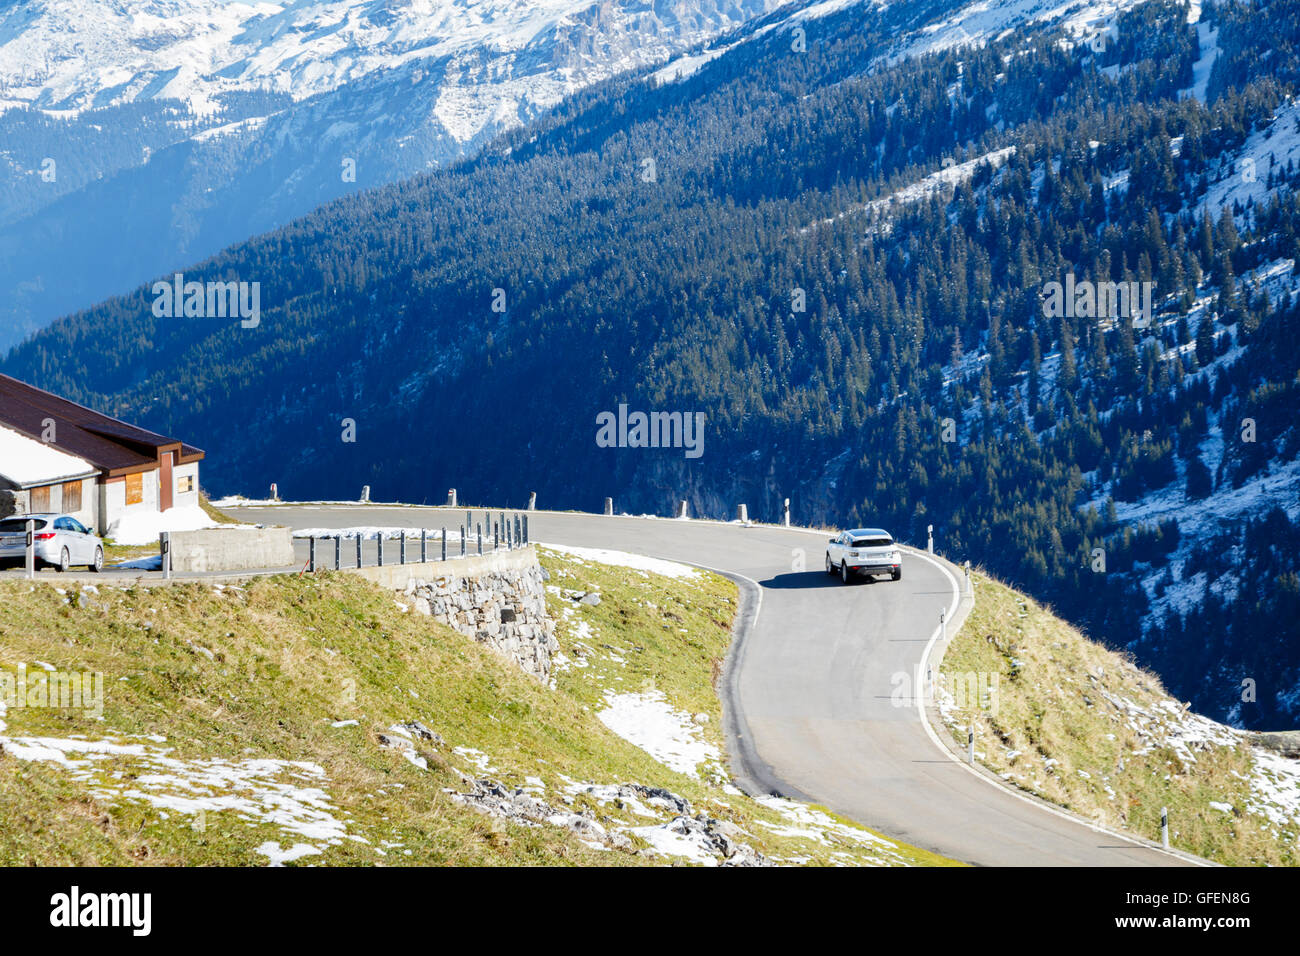 Image of a car driving on a mountain road Stock Photo